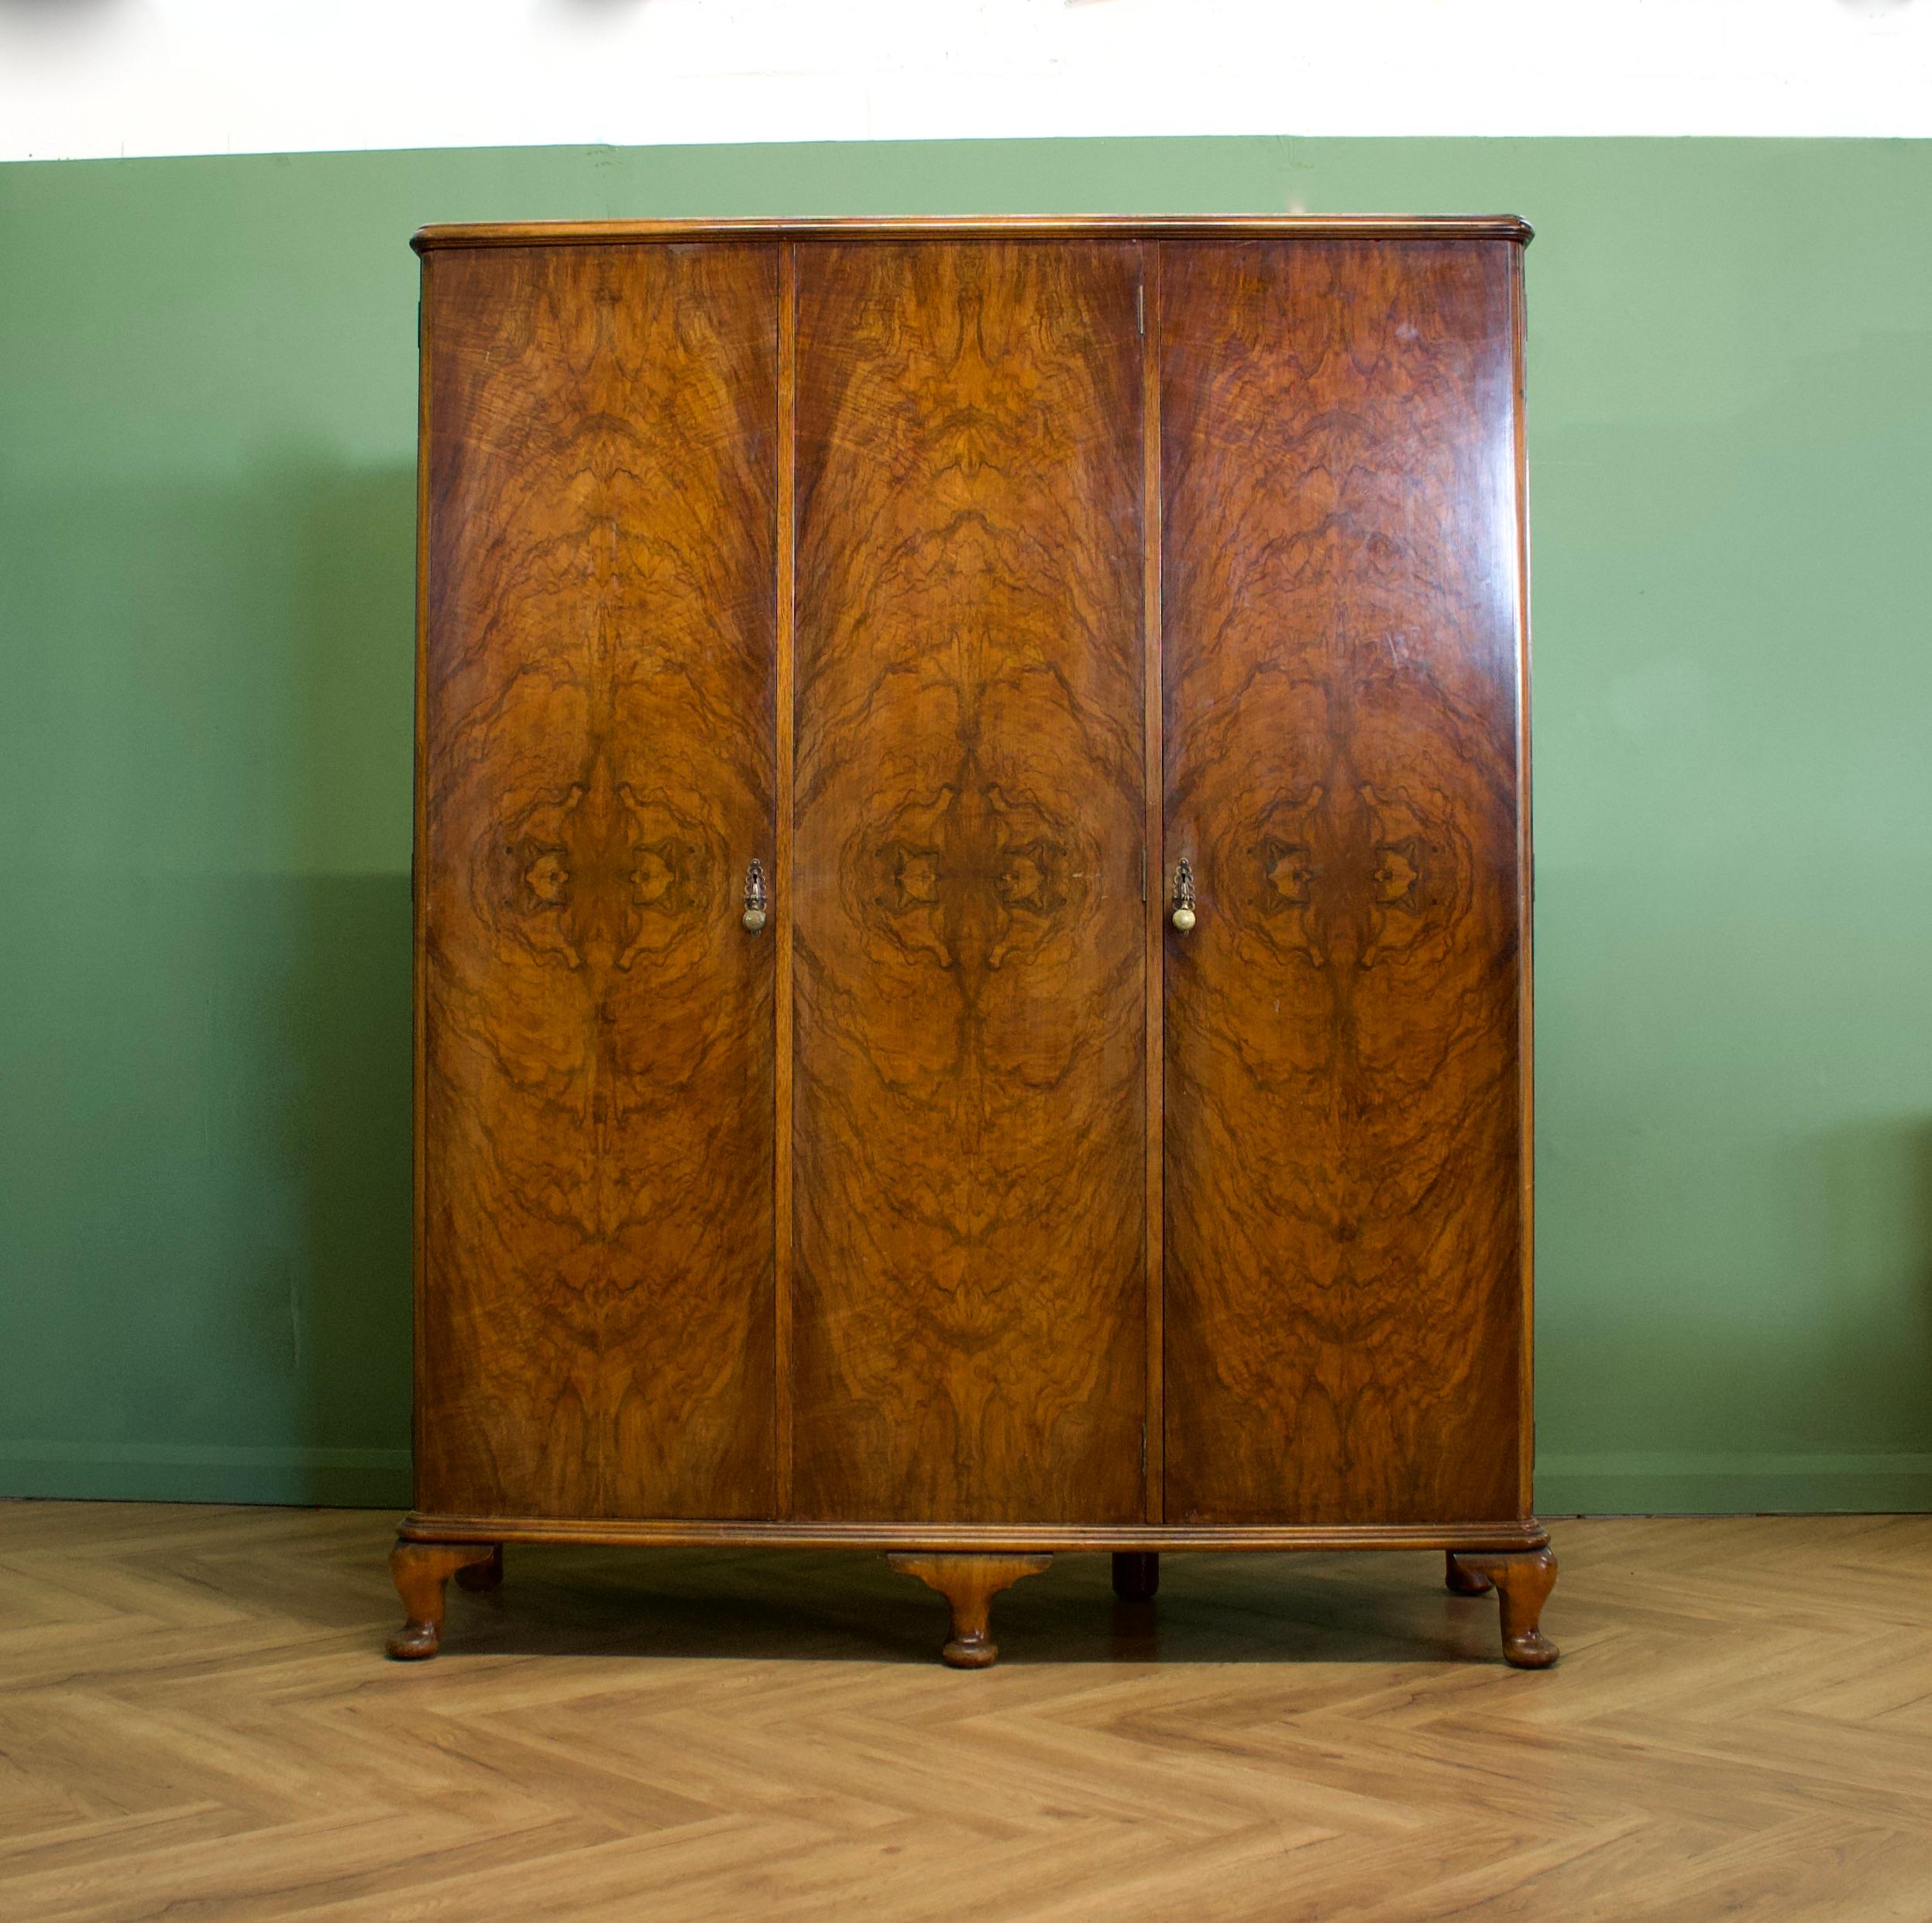 An impressive quality, 1930's burr walnut triple door wardrobe - perfect for a maximalist interior
The intense walnut veneers have been beautifully quarter matched on the doors


The interior is beautifully fitted with a hanging rail to the larger